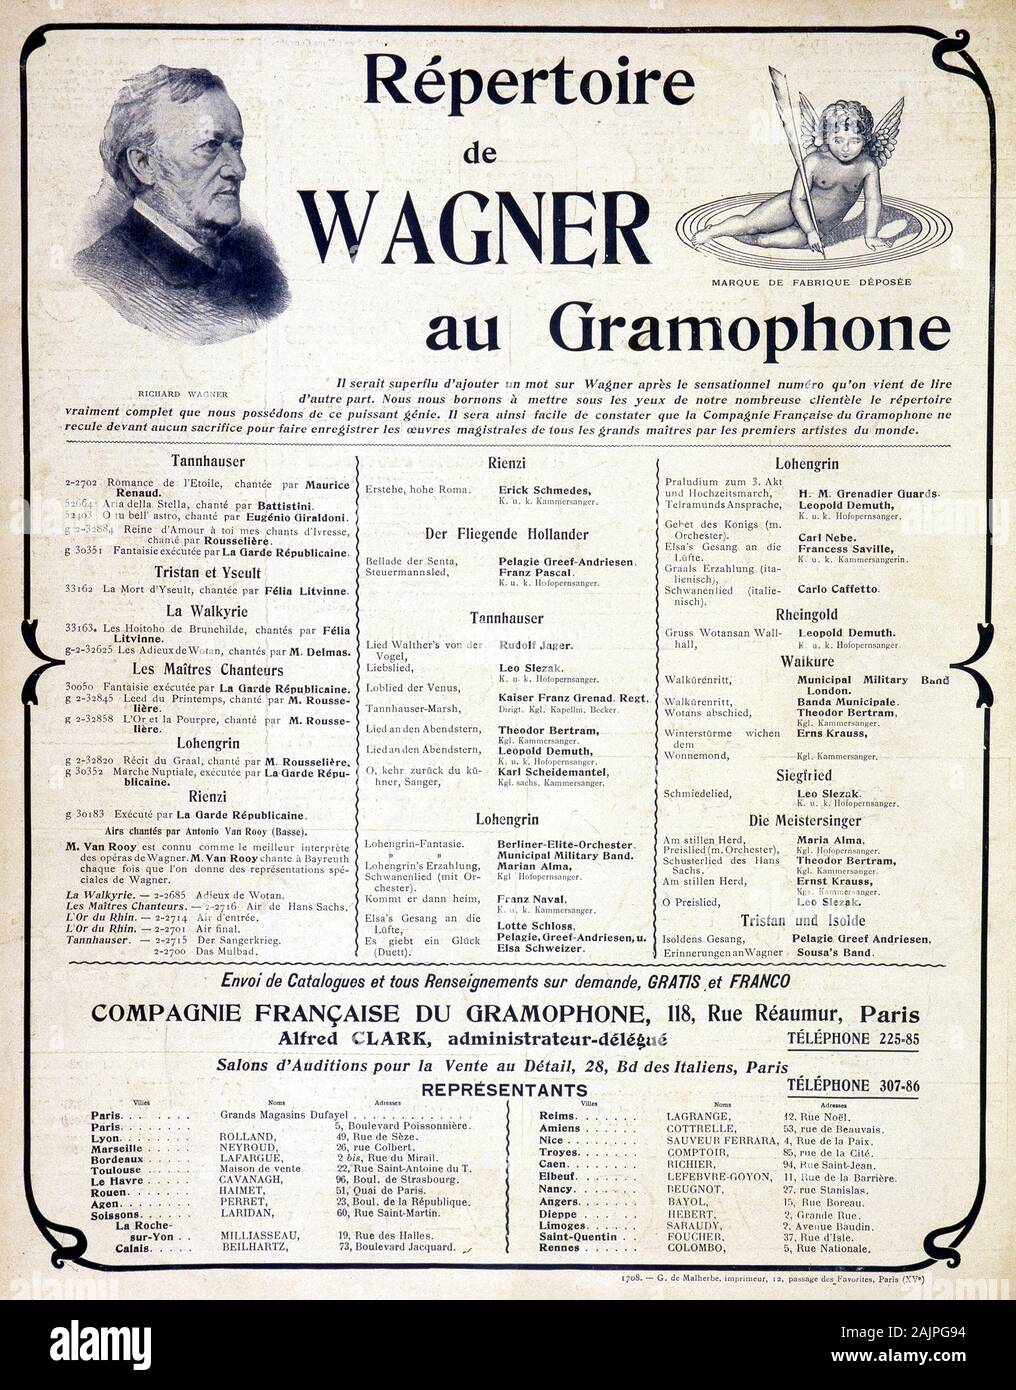 Publicite Gramophone pour le repertoire Wagner - in 'Musica', oct. 1903 Stock Photo